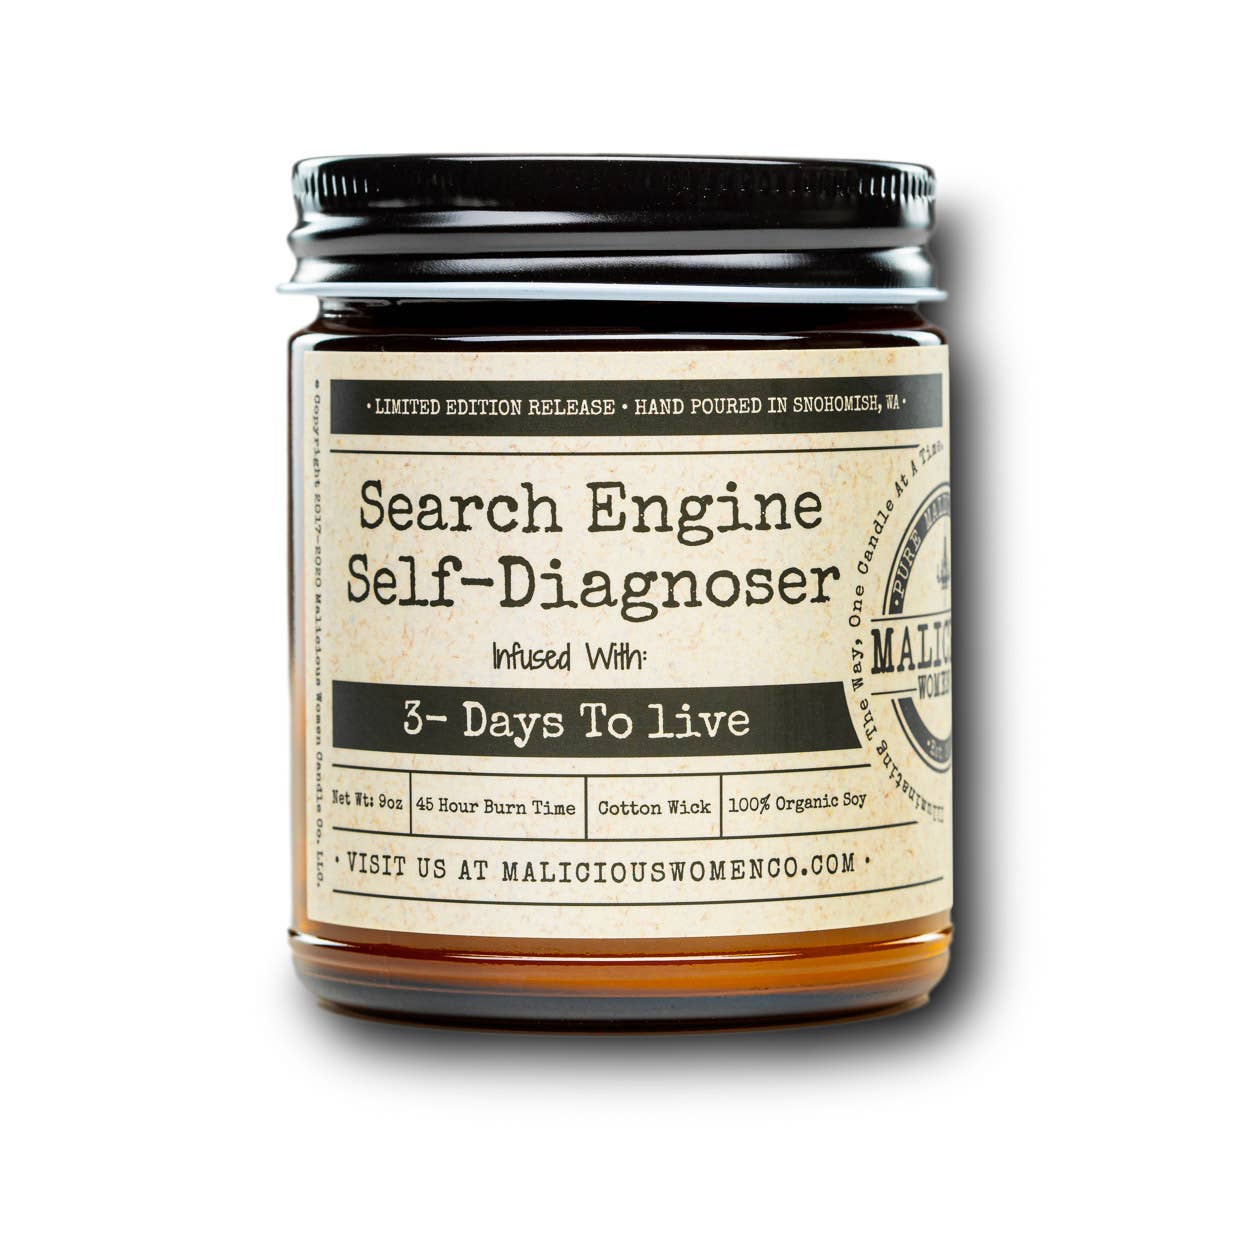 Search Engine Self- Diagnoser Candle